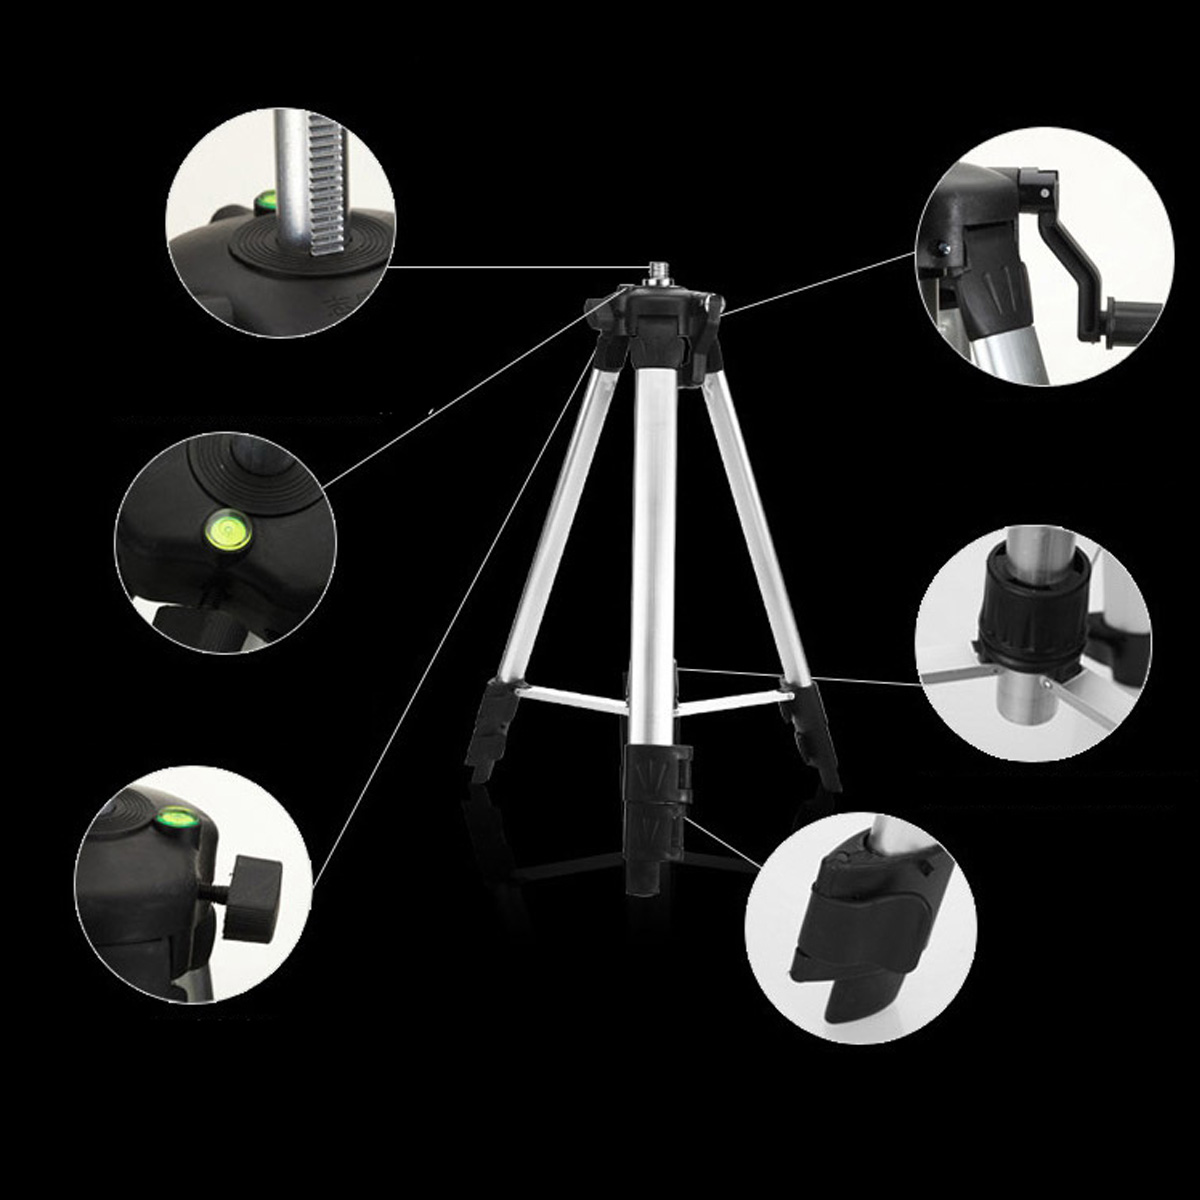 Professional-Tripod-Adjustable-for-Rotary-Laser-Leveling-Measuring-Tool-Instruments-Line-Level-Exten-1616473-5